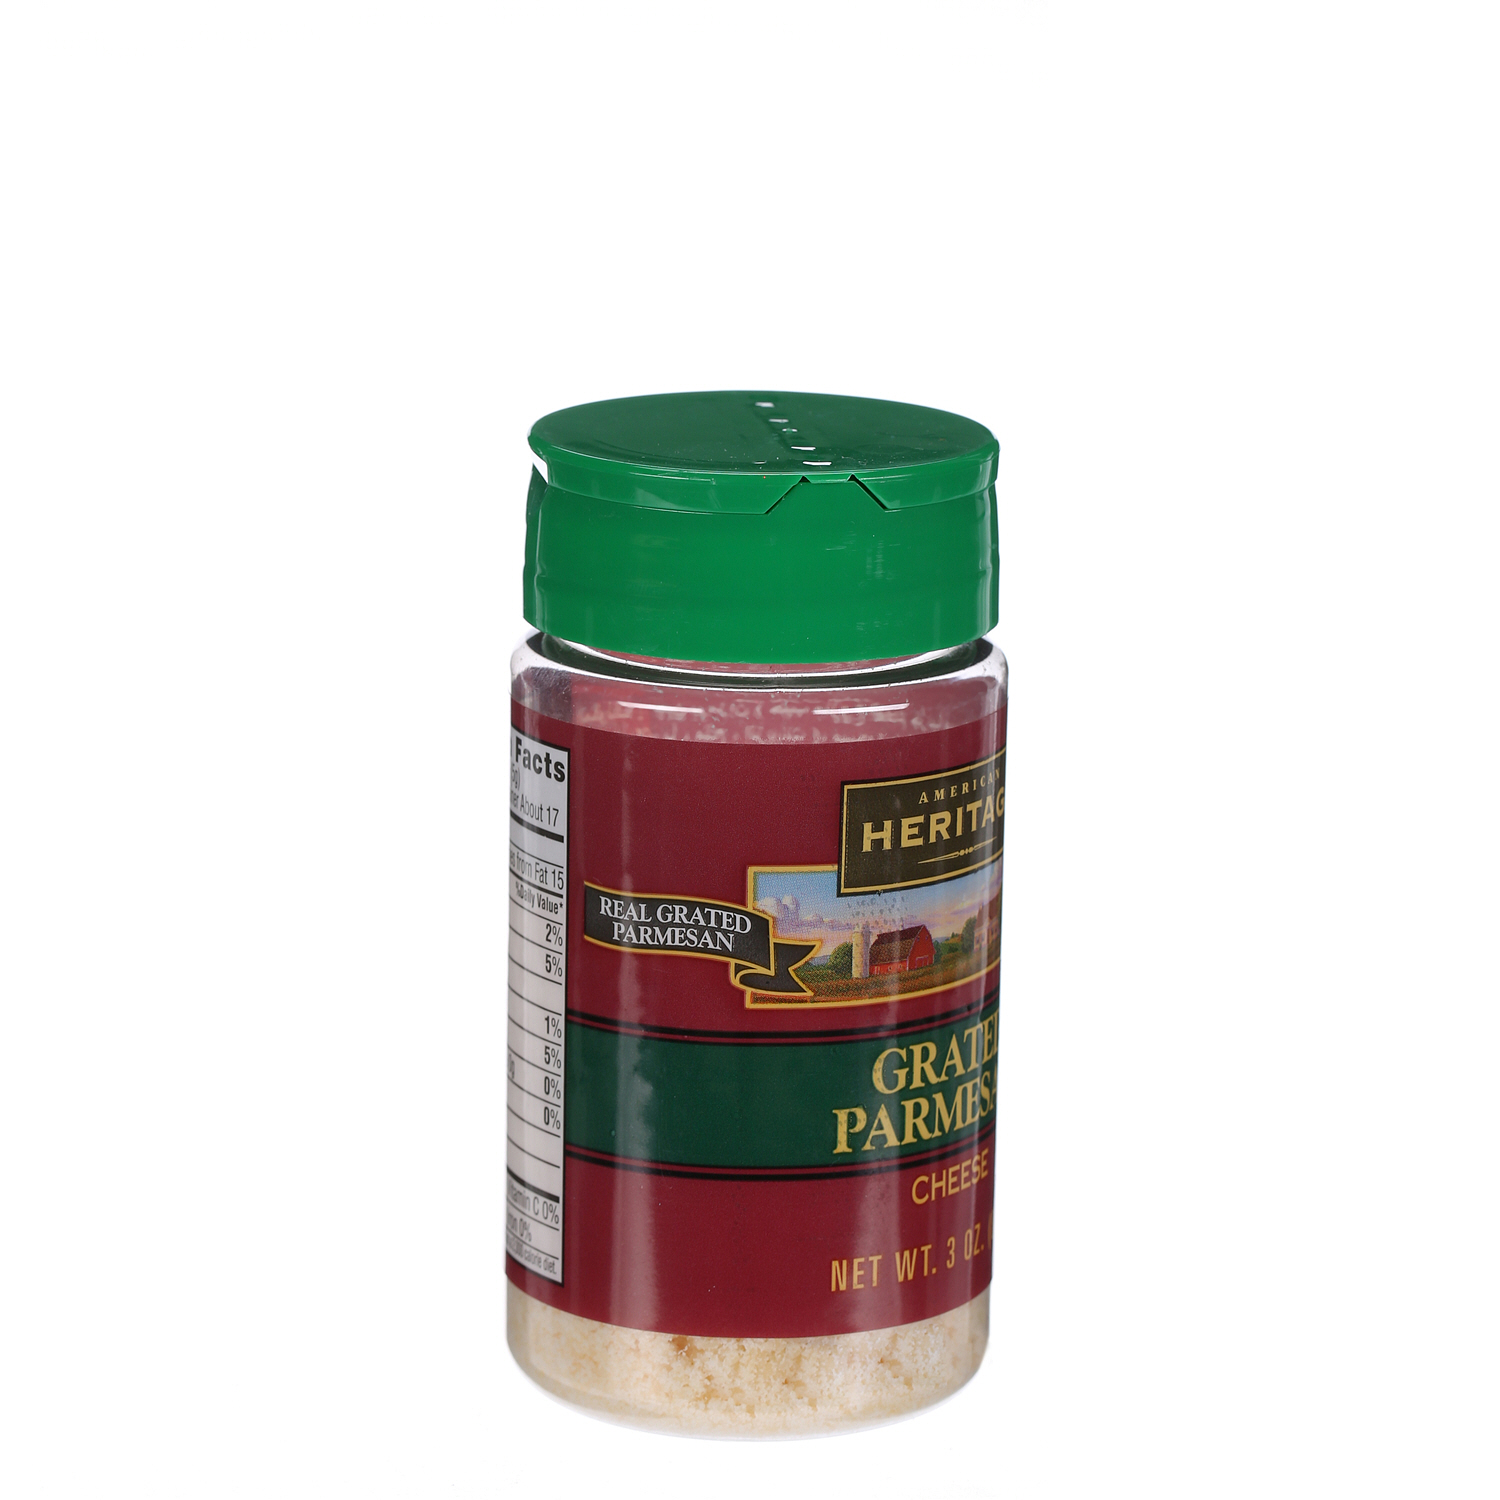 American Heritage Grated Parmesan Cheese 3oz